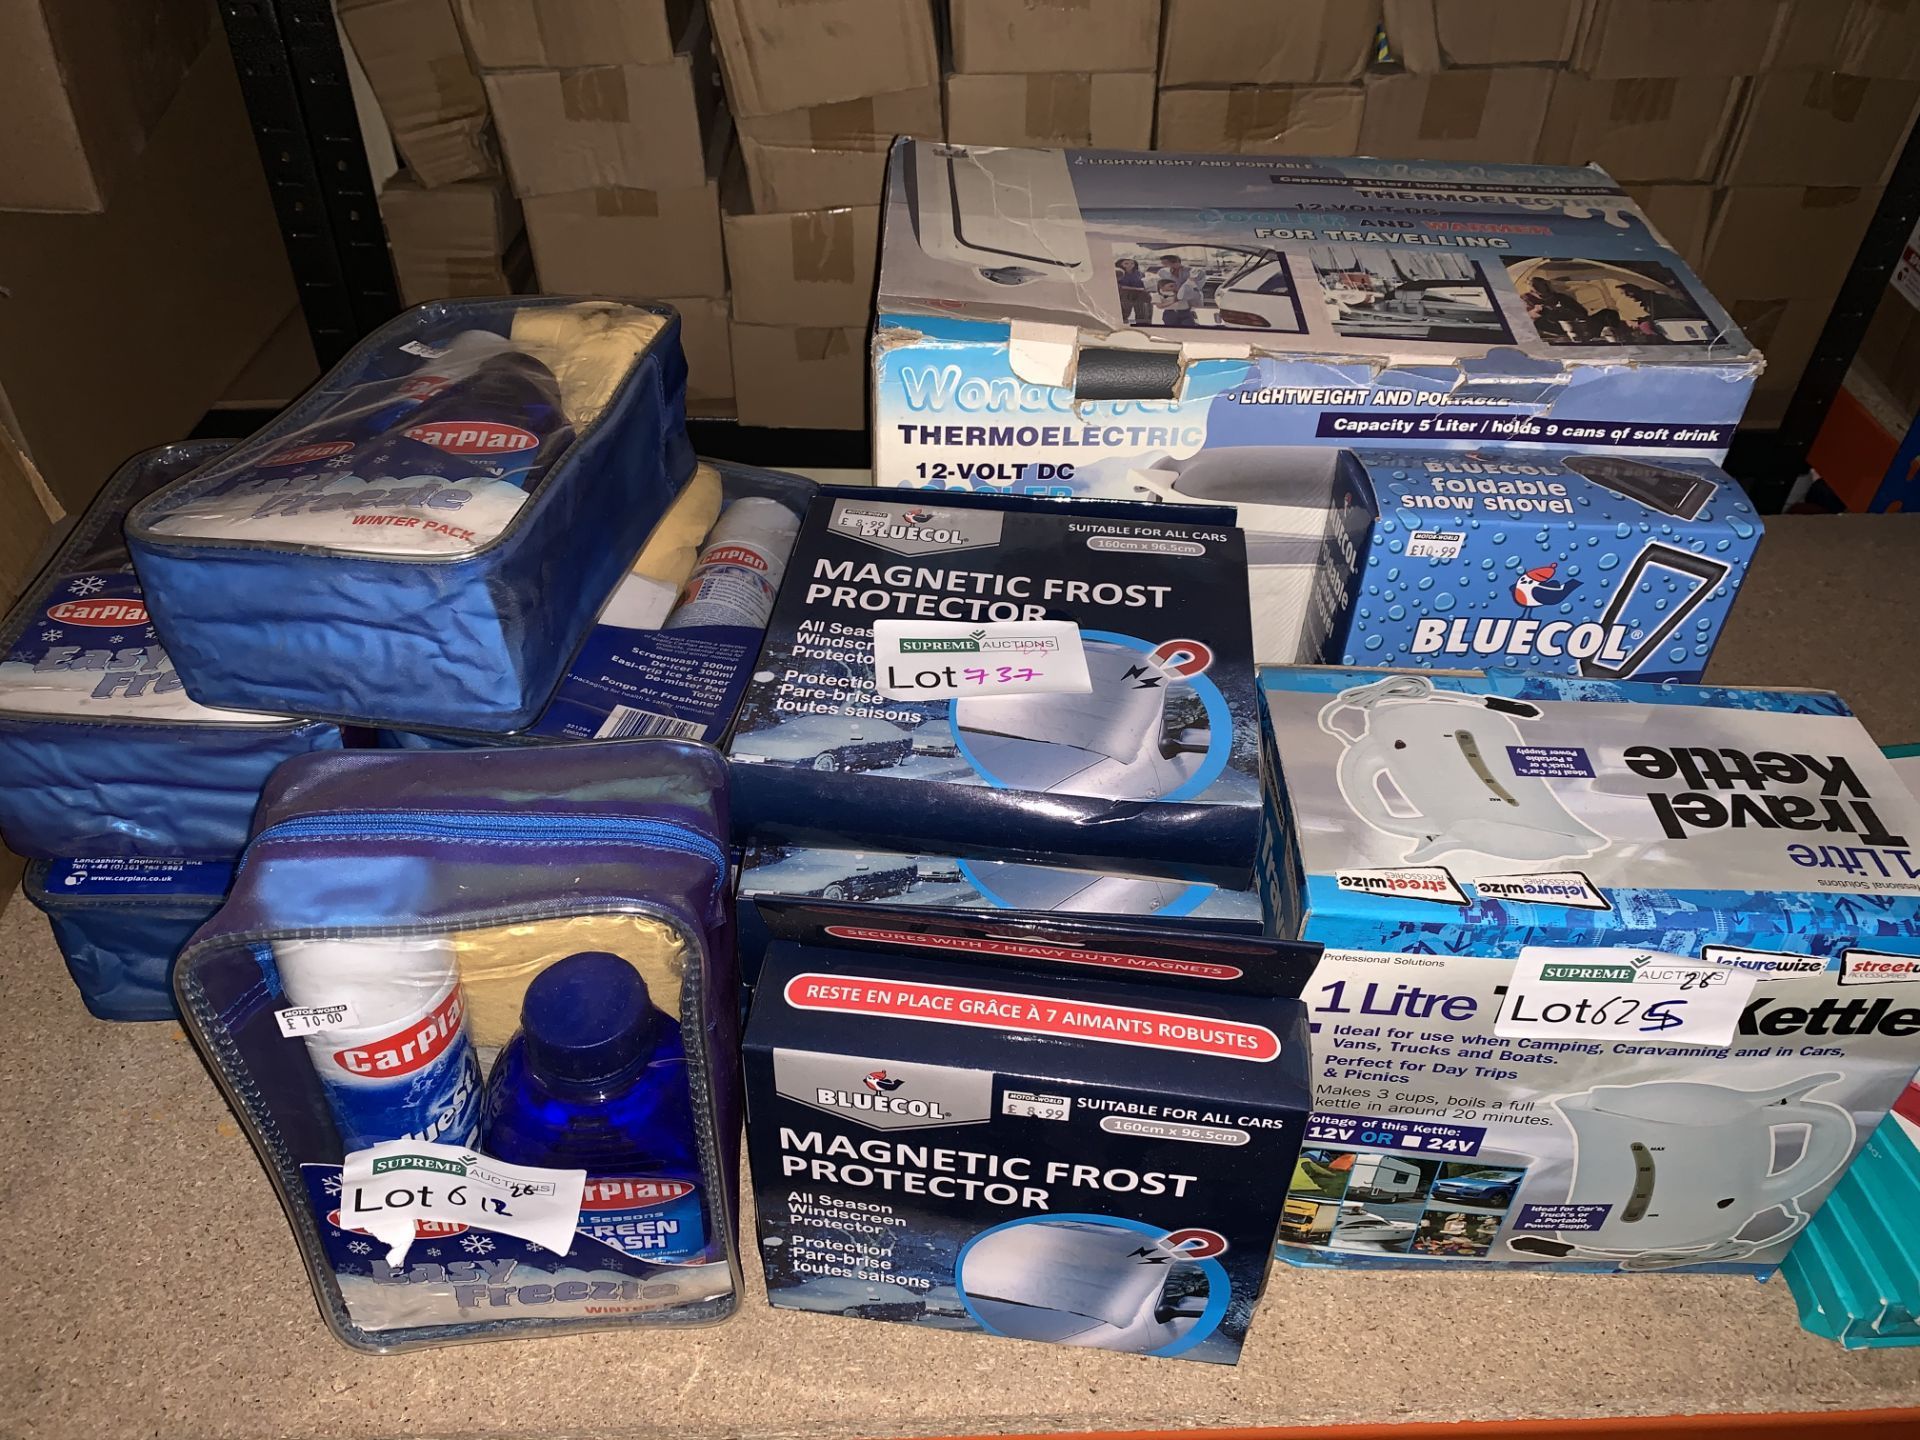 15 PIECE MIXED LOT INCLUDING TRAVEL KETTLE, EASY FREEZE WINTER PACKS, MAGNETIC FROST PROTECTORS, ETC